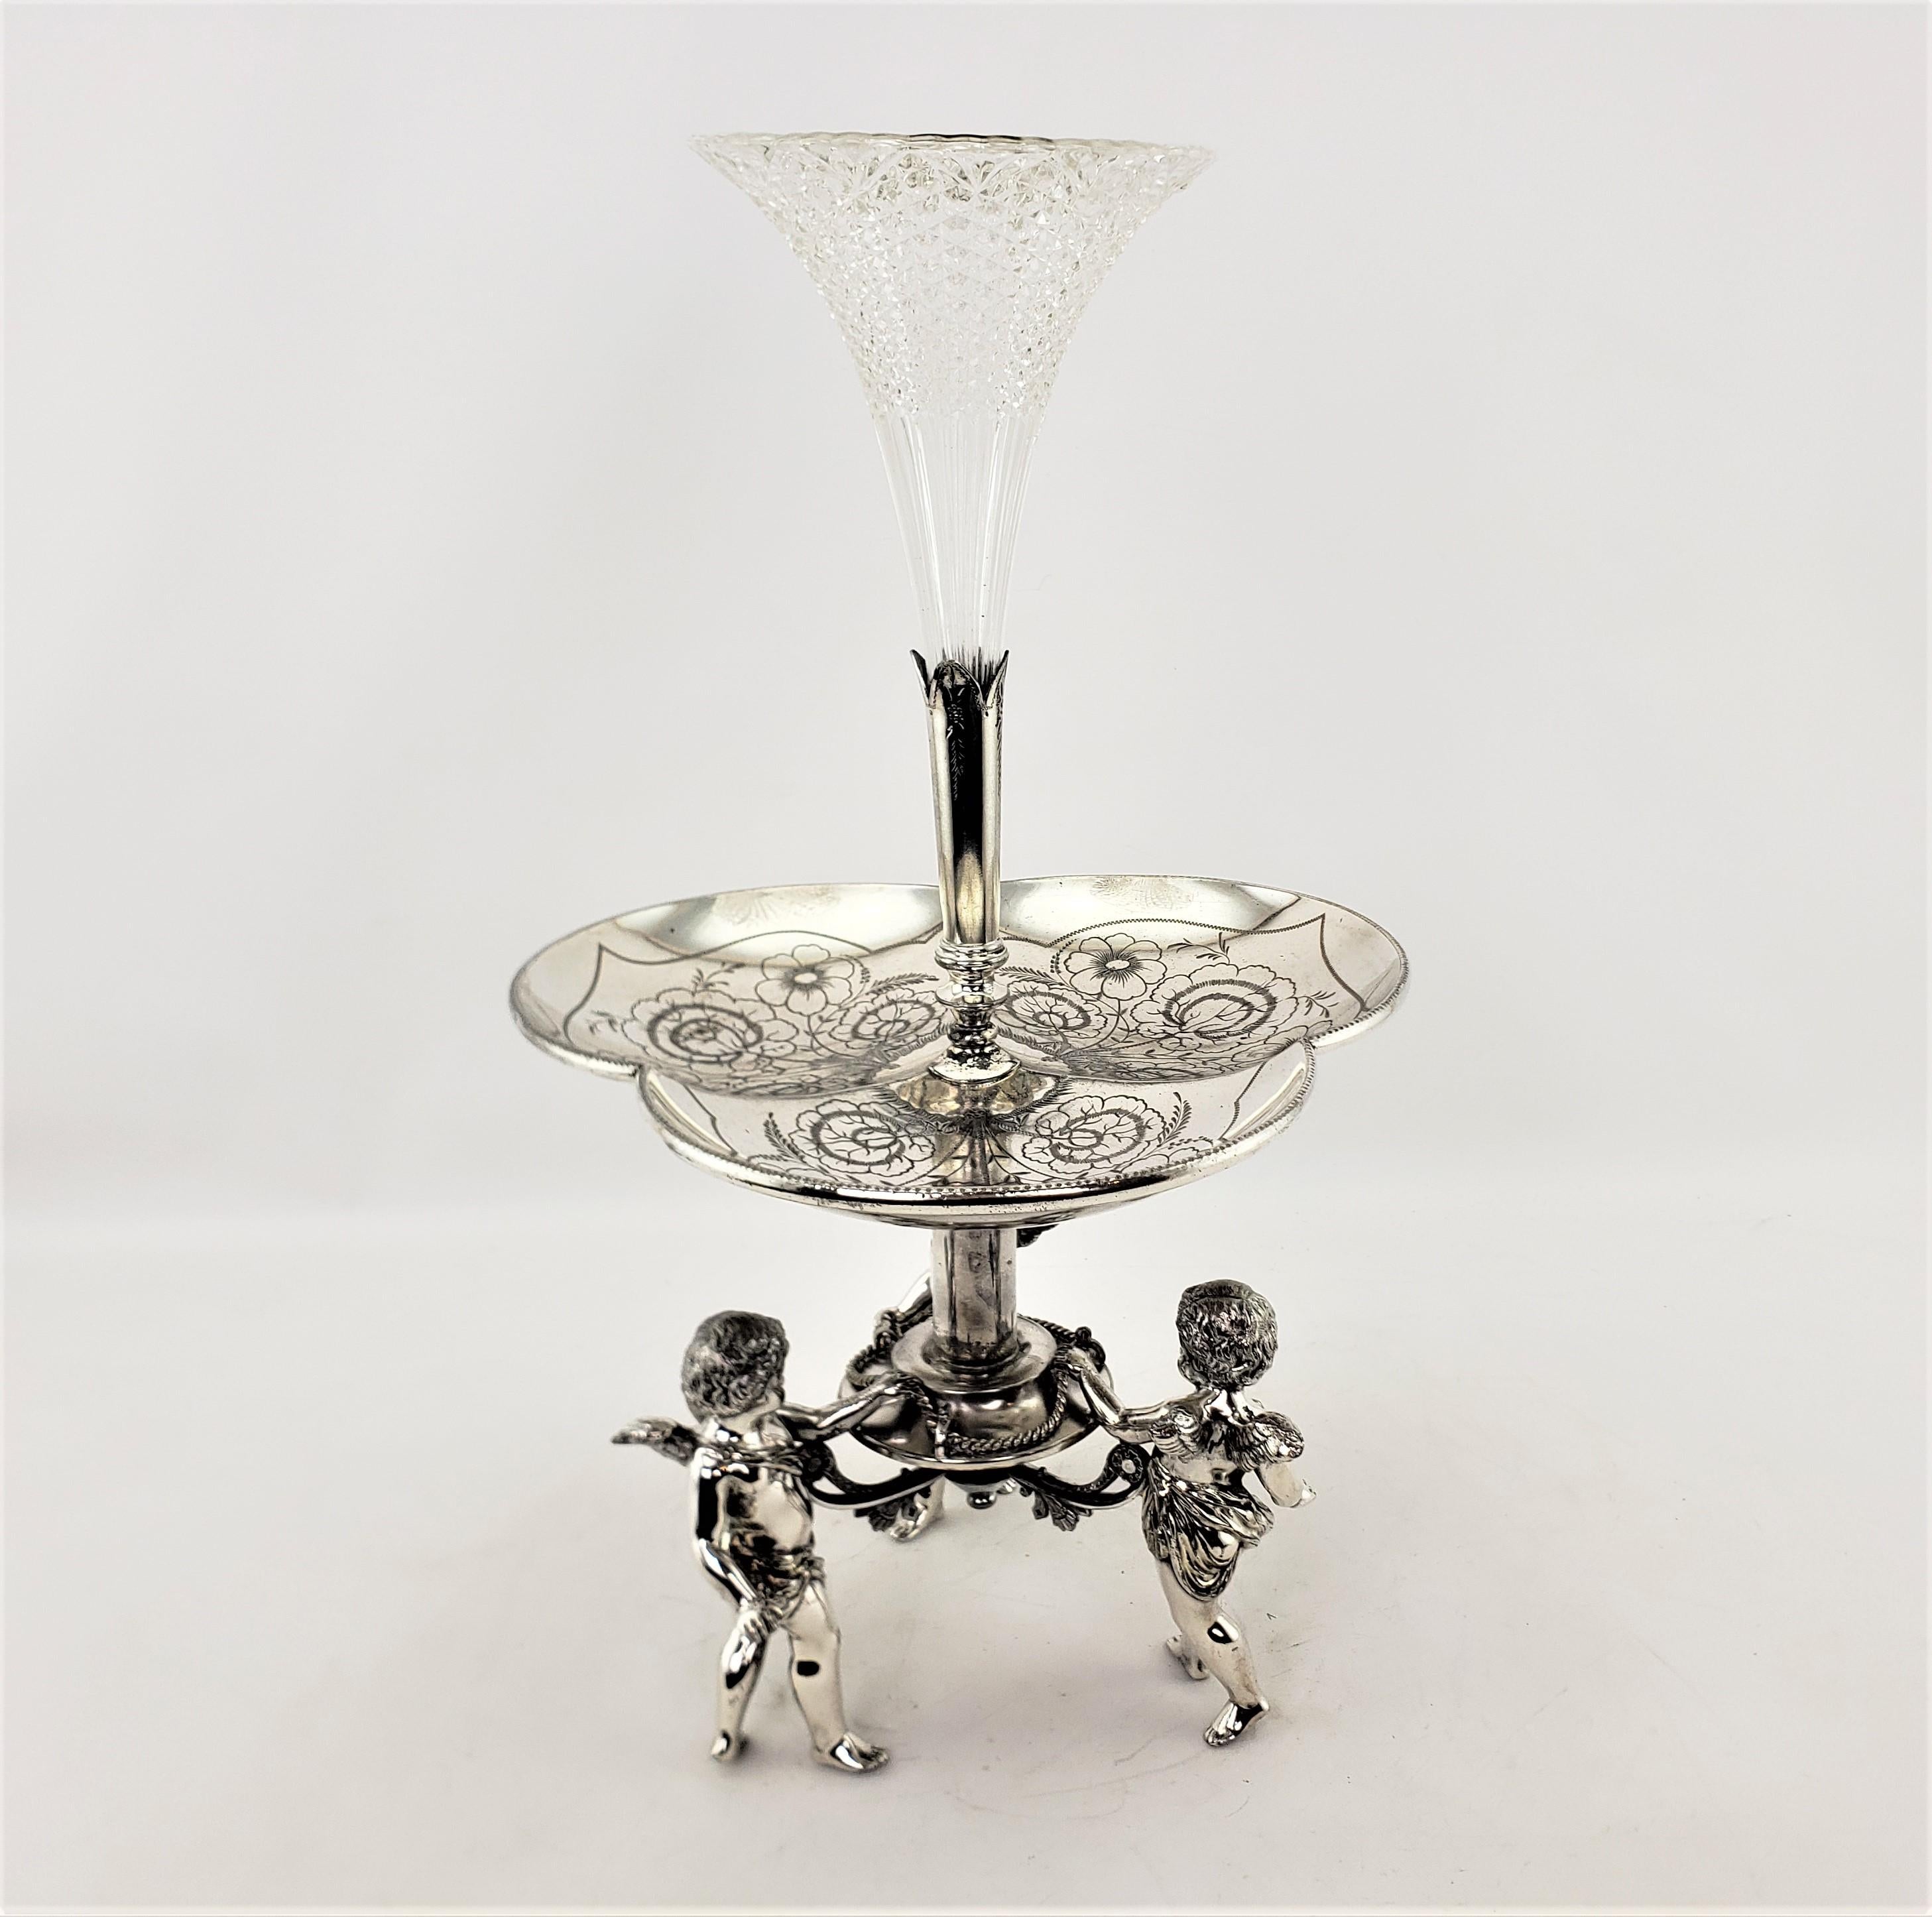 Machine-Made Antique Silver Plated Centerpiece or Epergne with Figural Children Playing For Sale